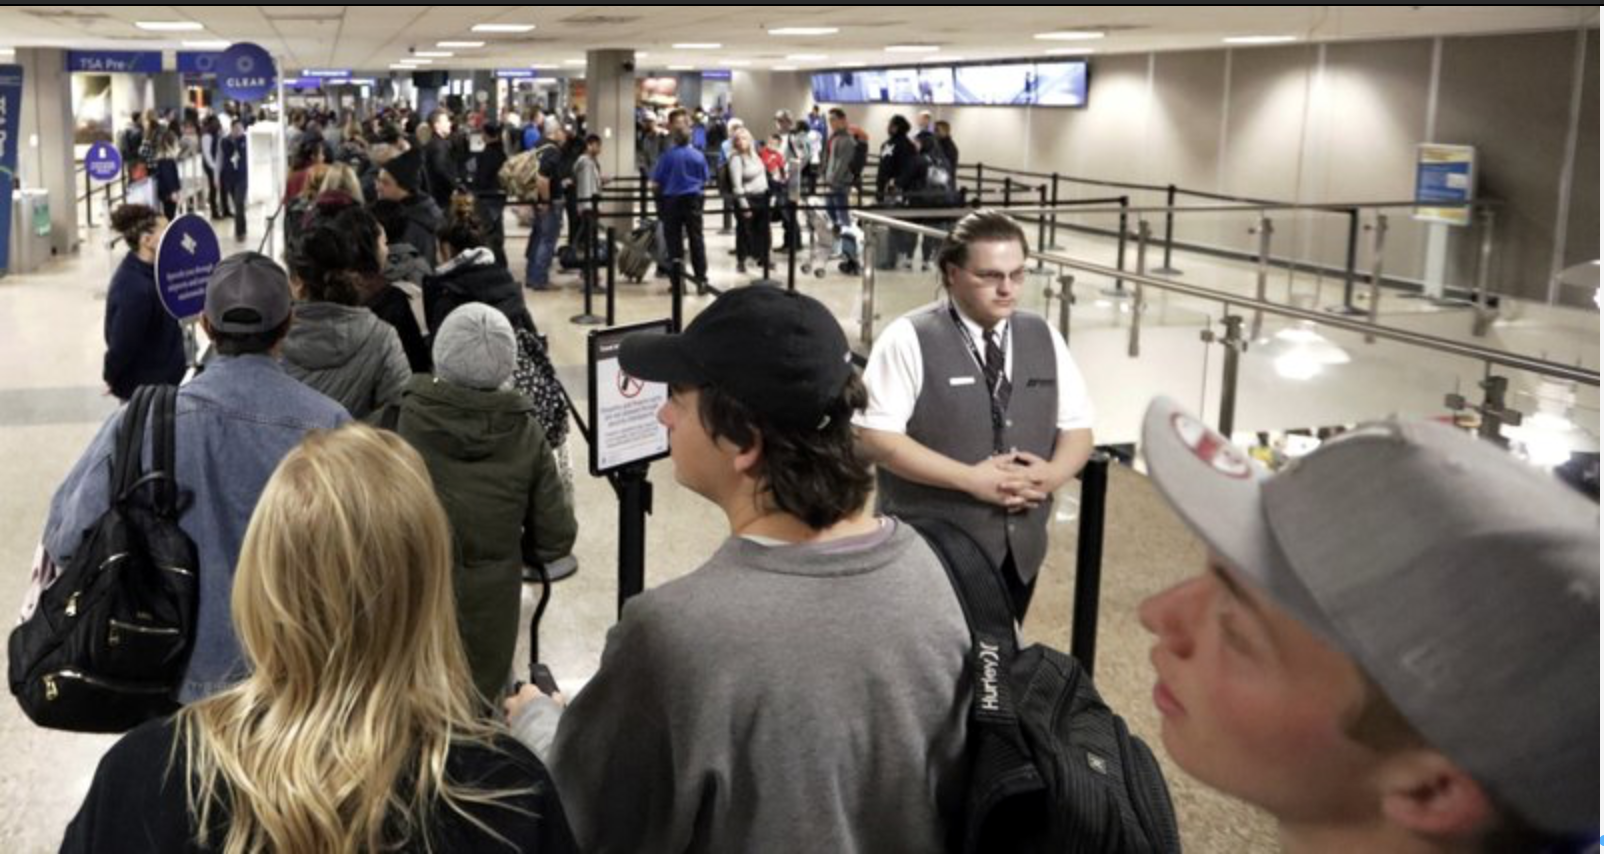 DHS considering photographing passengers at airports